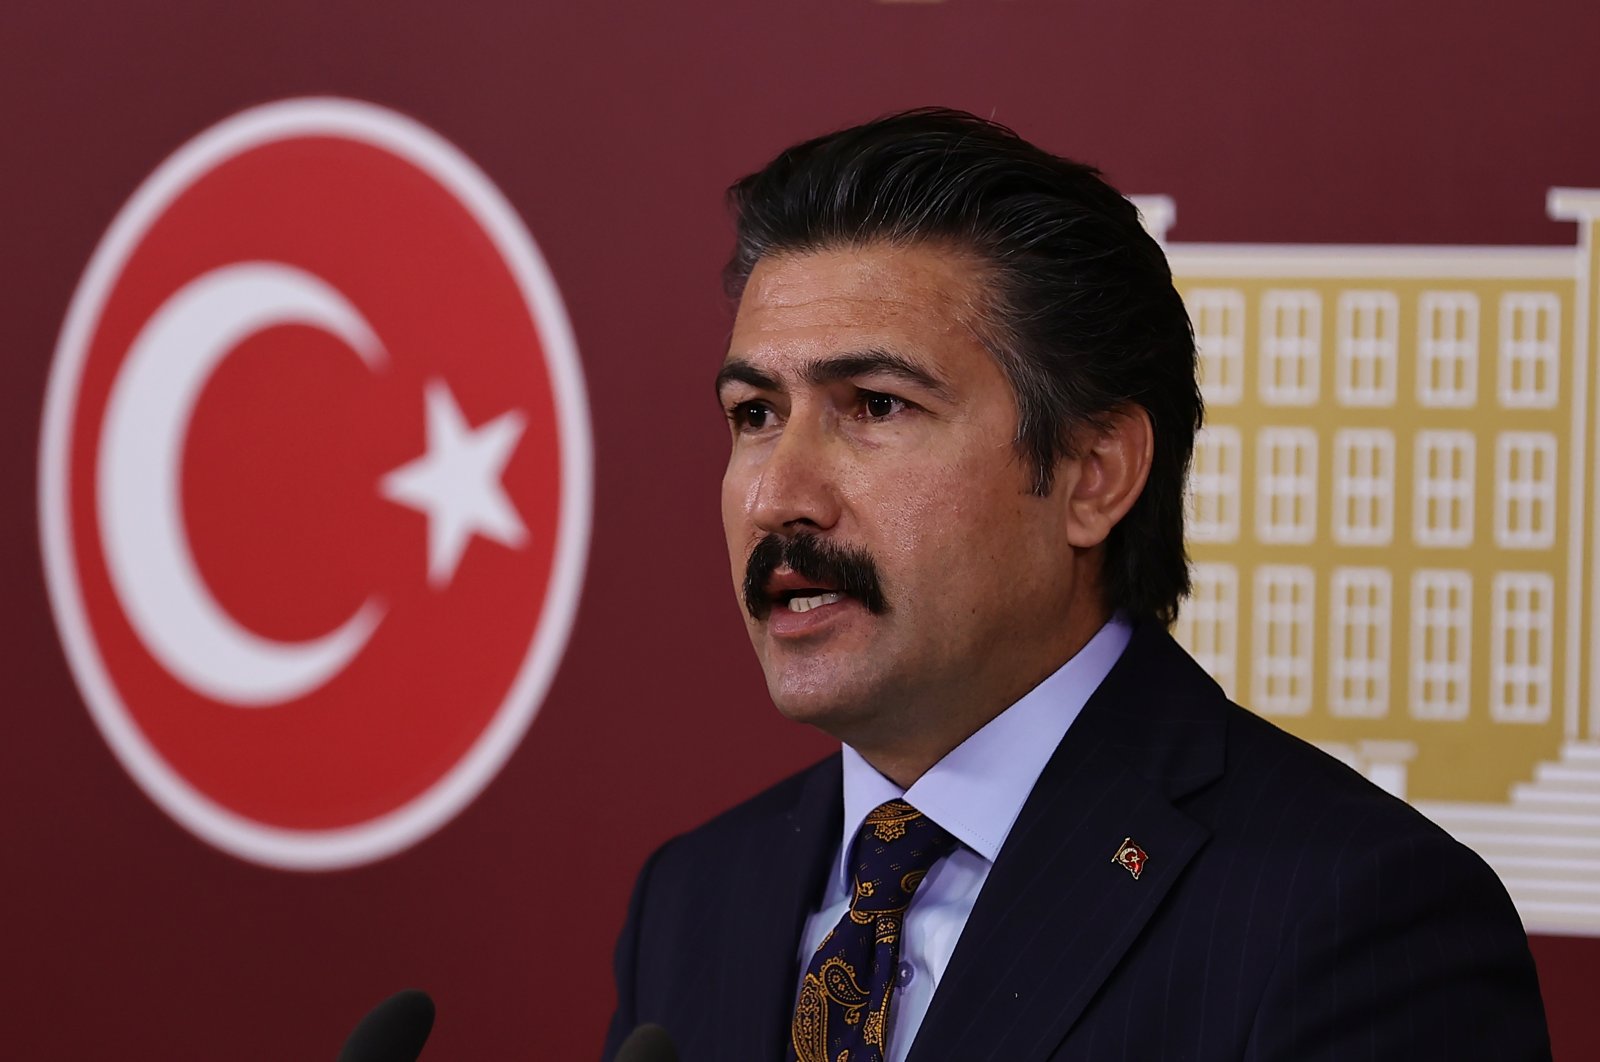 AK Party Group Deputy Chairperson Cahit Özkan speaks at a press conference in TBMM, Ankara, Turkey, April 1, 2021. (AA Photo)